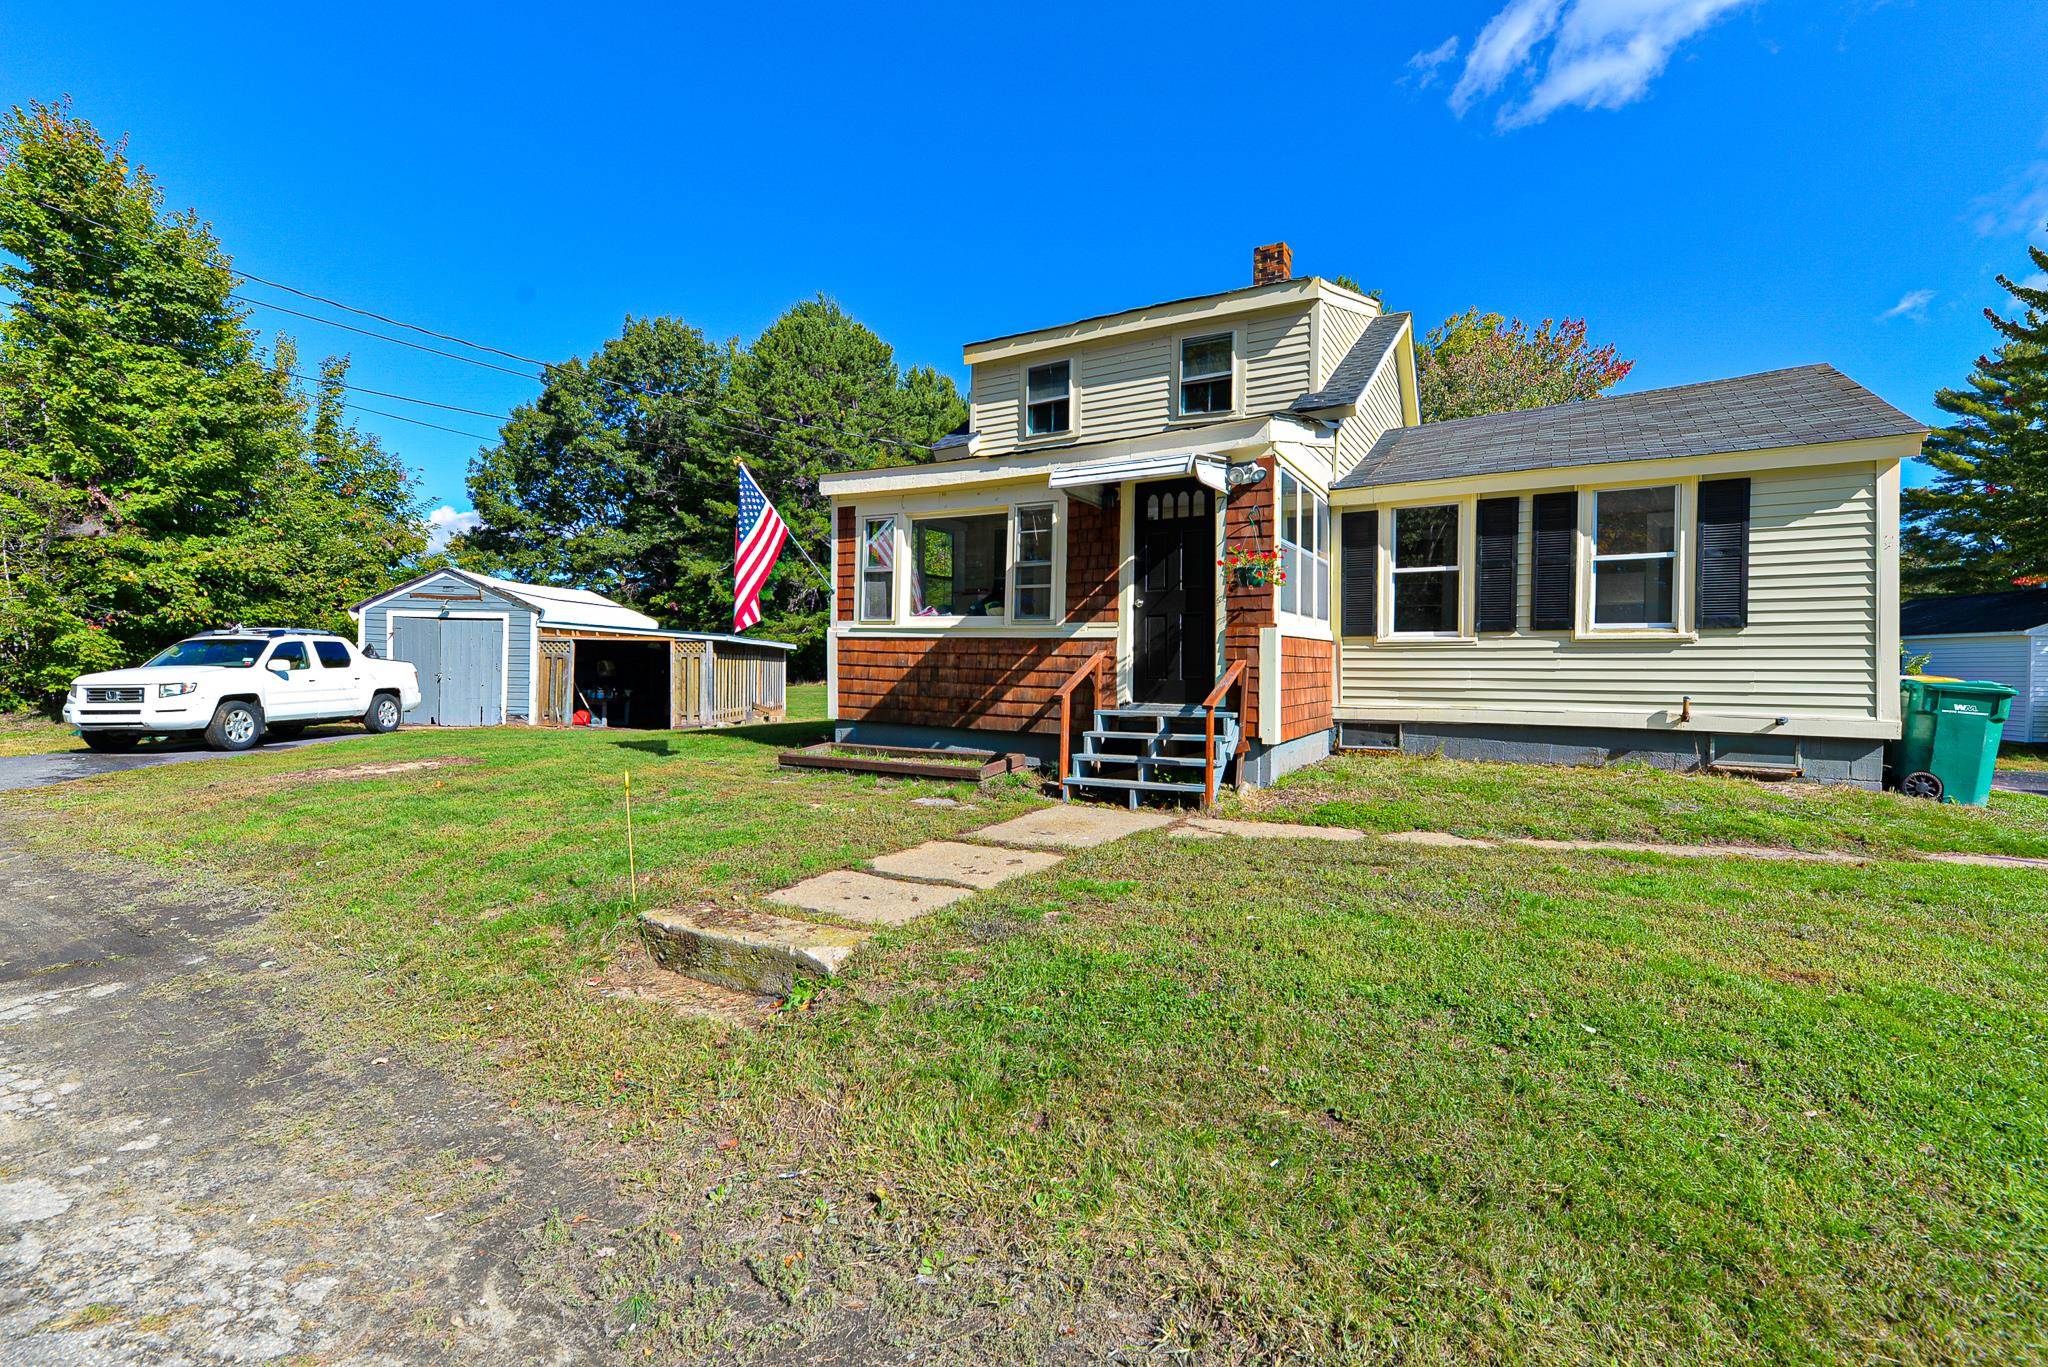 7 Flagg Road, Rochester, NH 03839